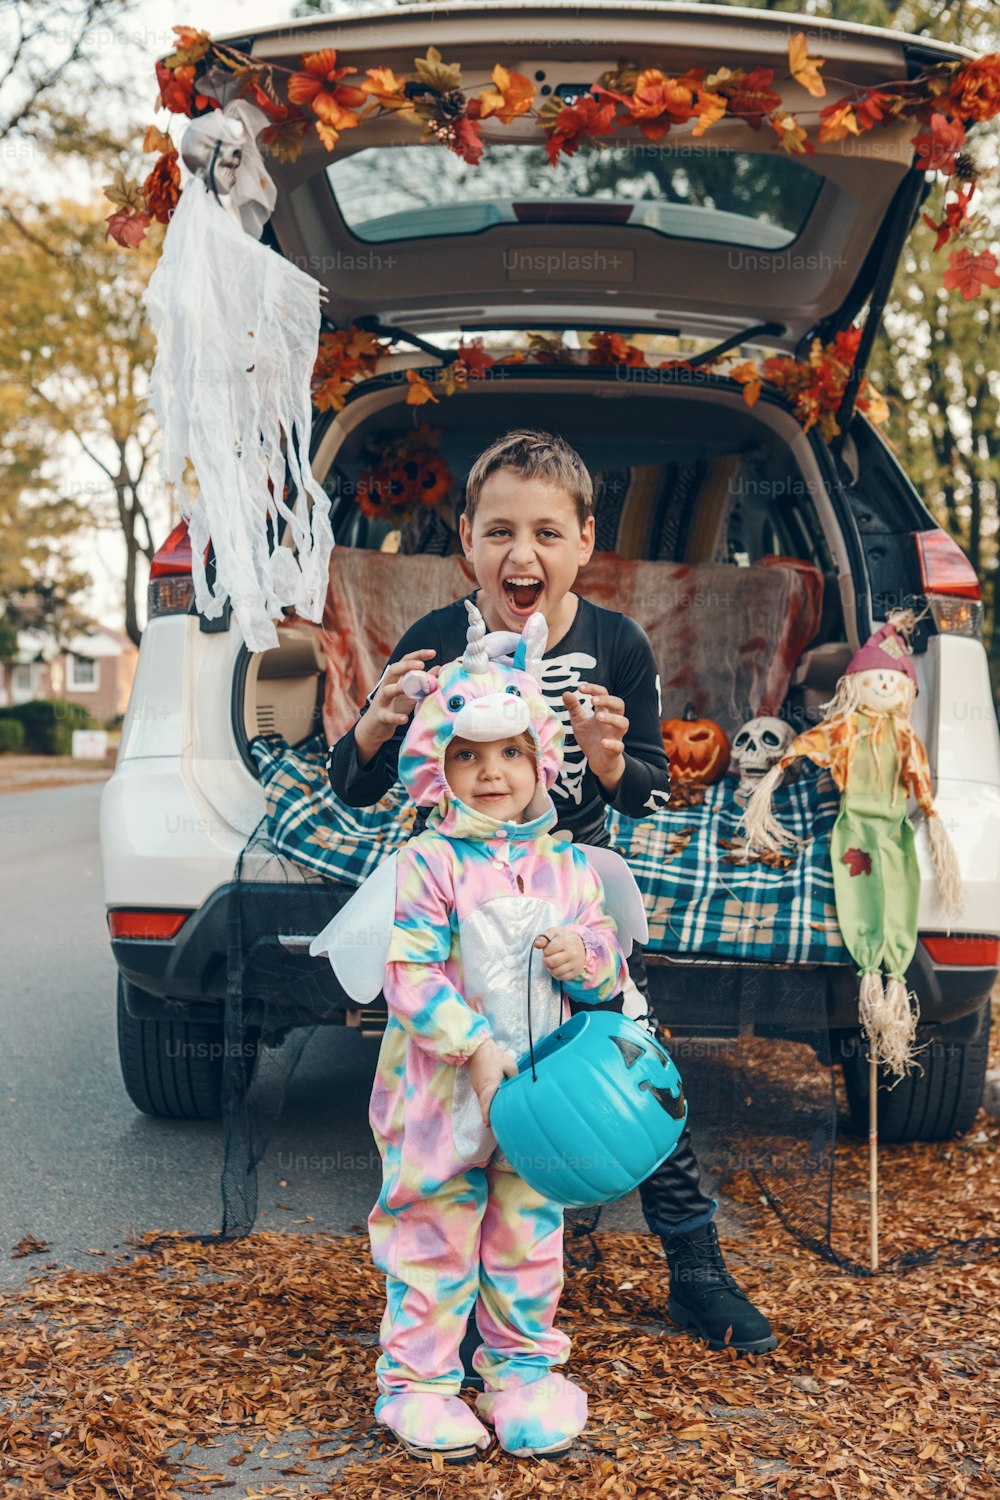 Trick o trunk. Siblings brother and sister celebrating Halloween in trunk of car. Children kids boy and baby girl celebrating October holiday outdoor. Social distance and safe alternative celebration